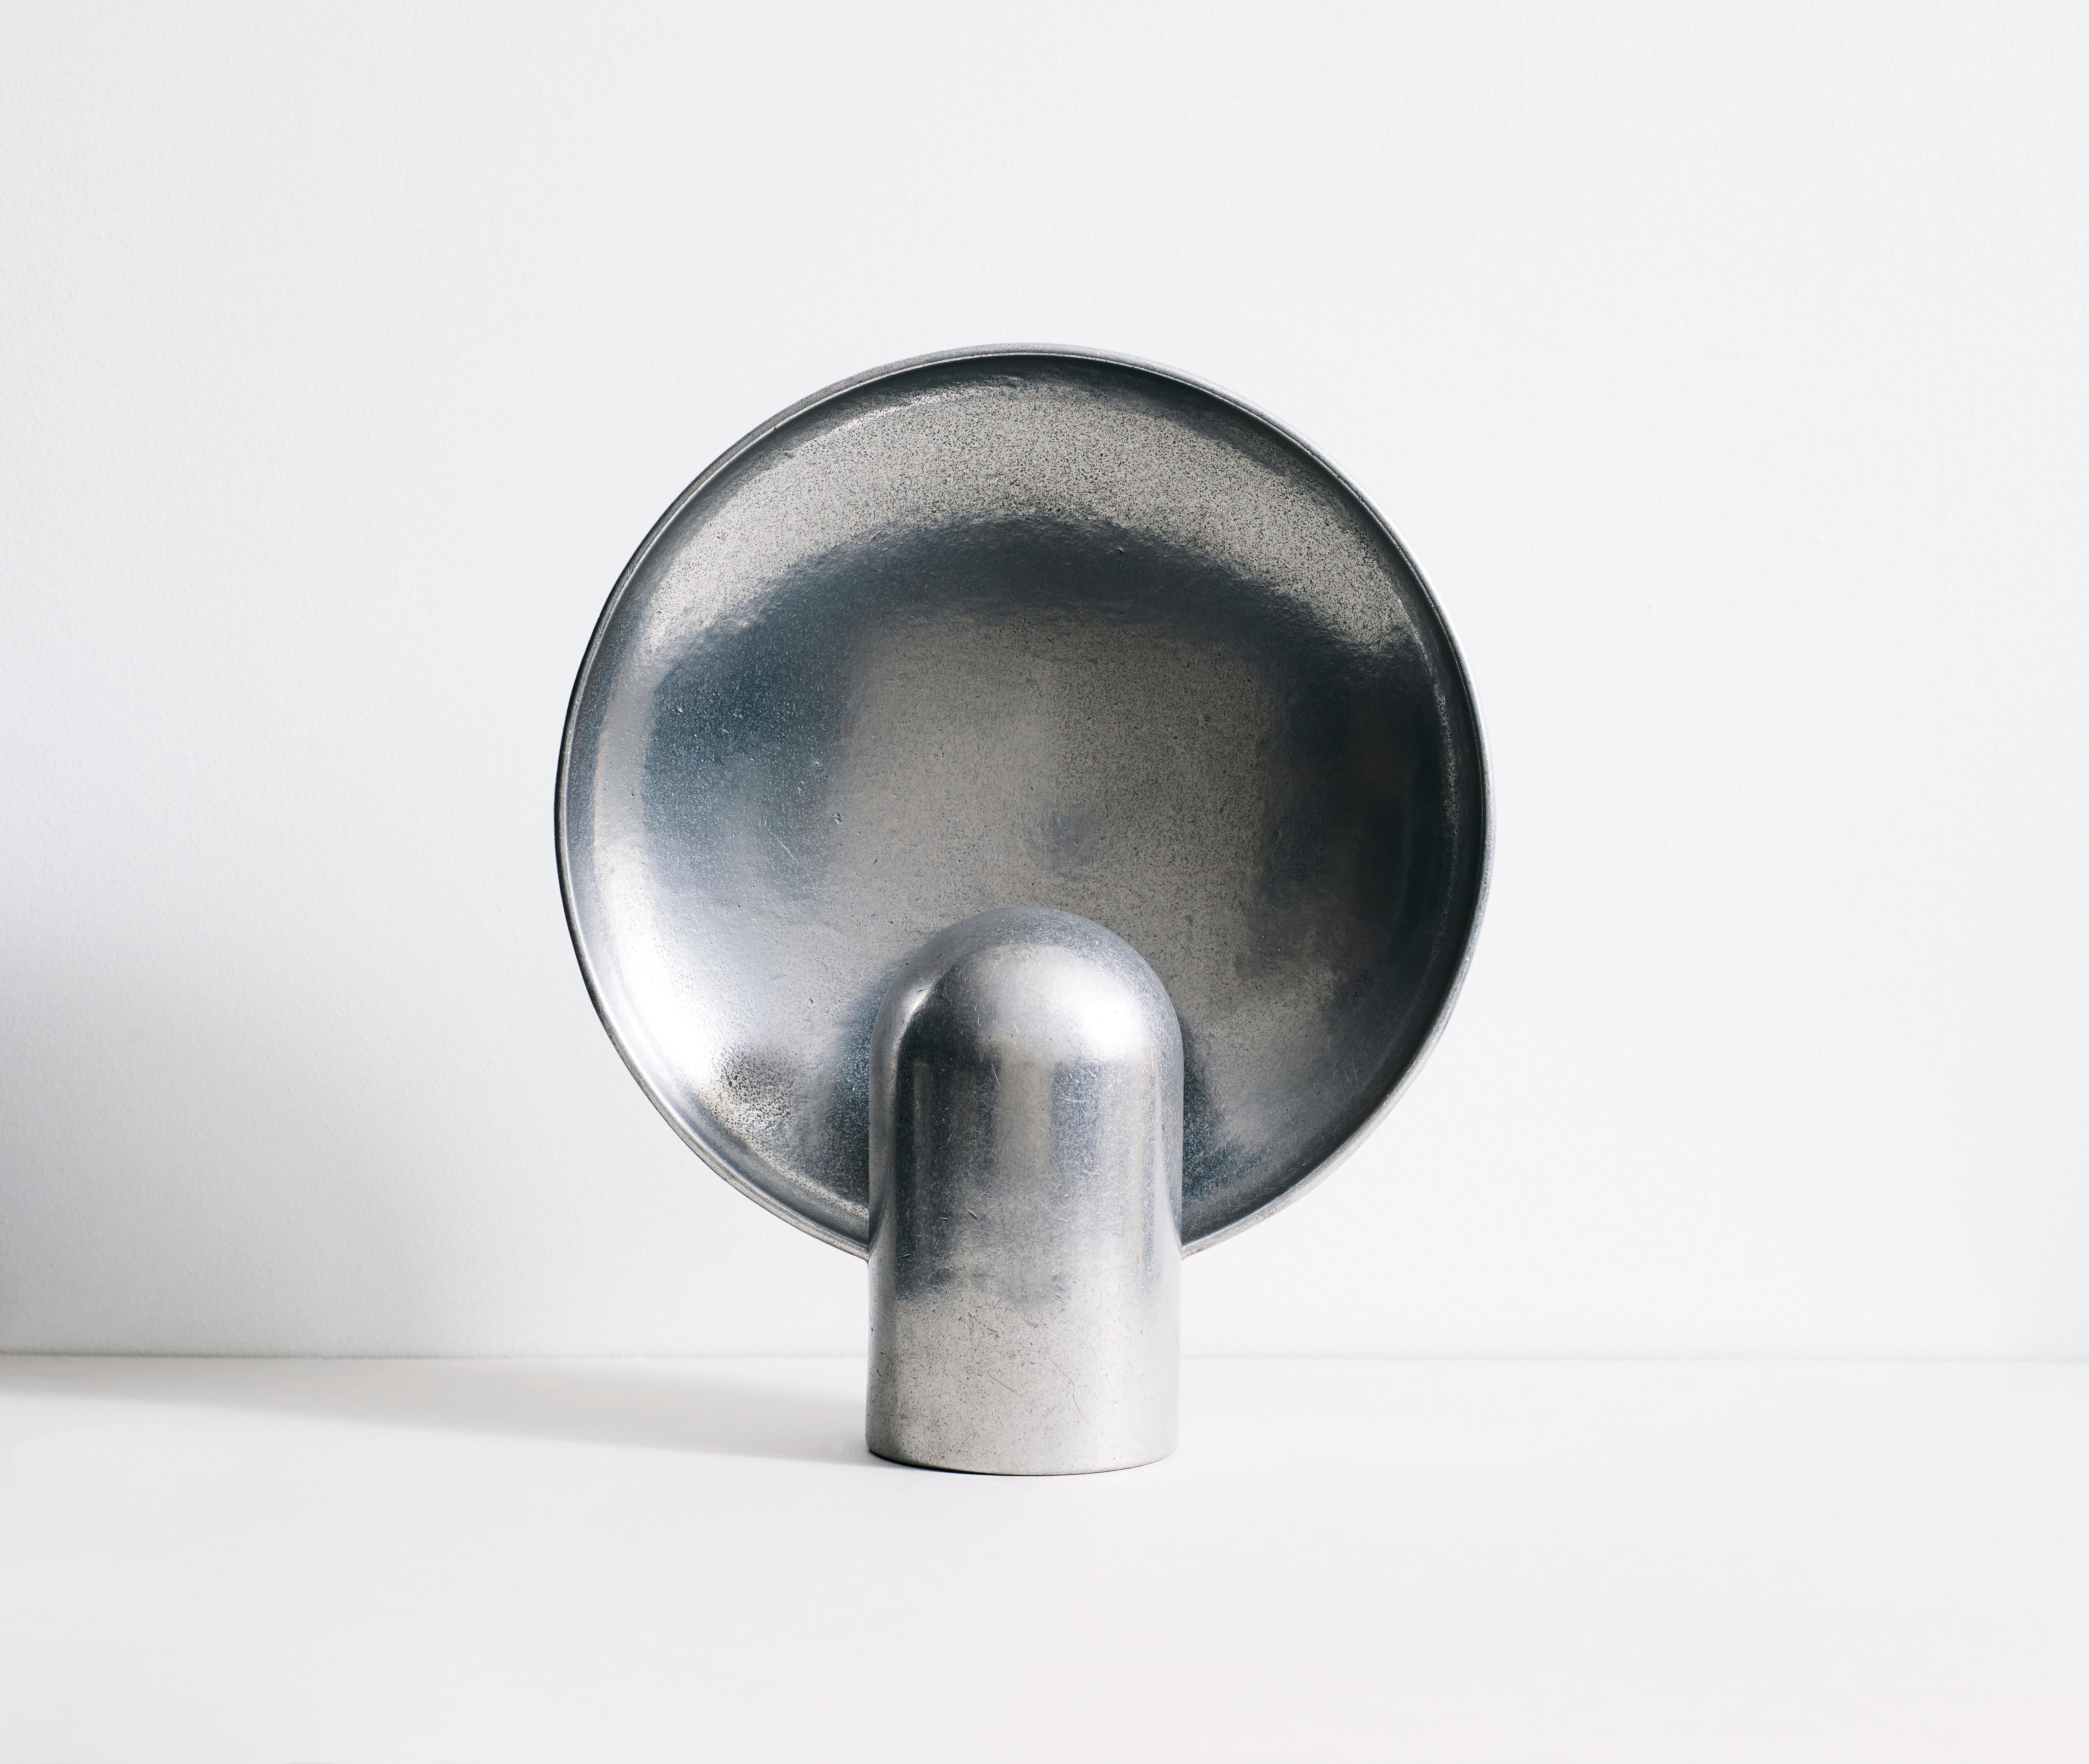 Aluminum Surface Sconce by Henry Wilson
Dimensions: W 30 x D 11 x H 35 cm
Material: Aluminium
Also Available: Different Stones and Bronze variations

The surface sconce is an ambient, sculptural light cast in two halves from solid gunmetal. The